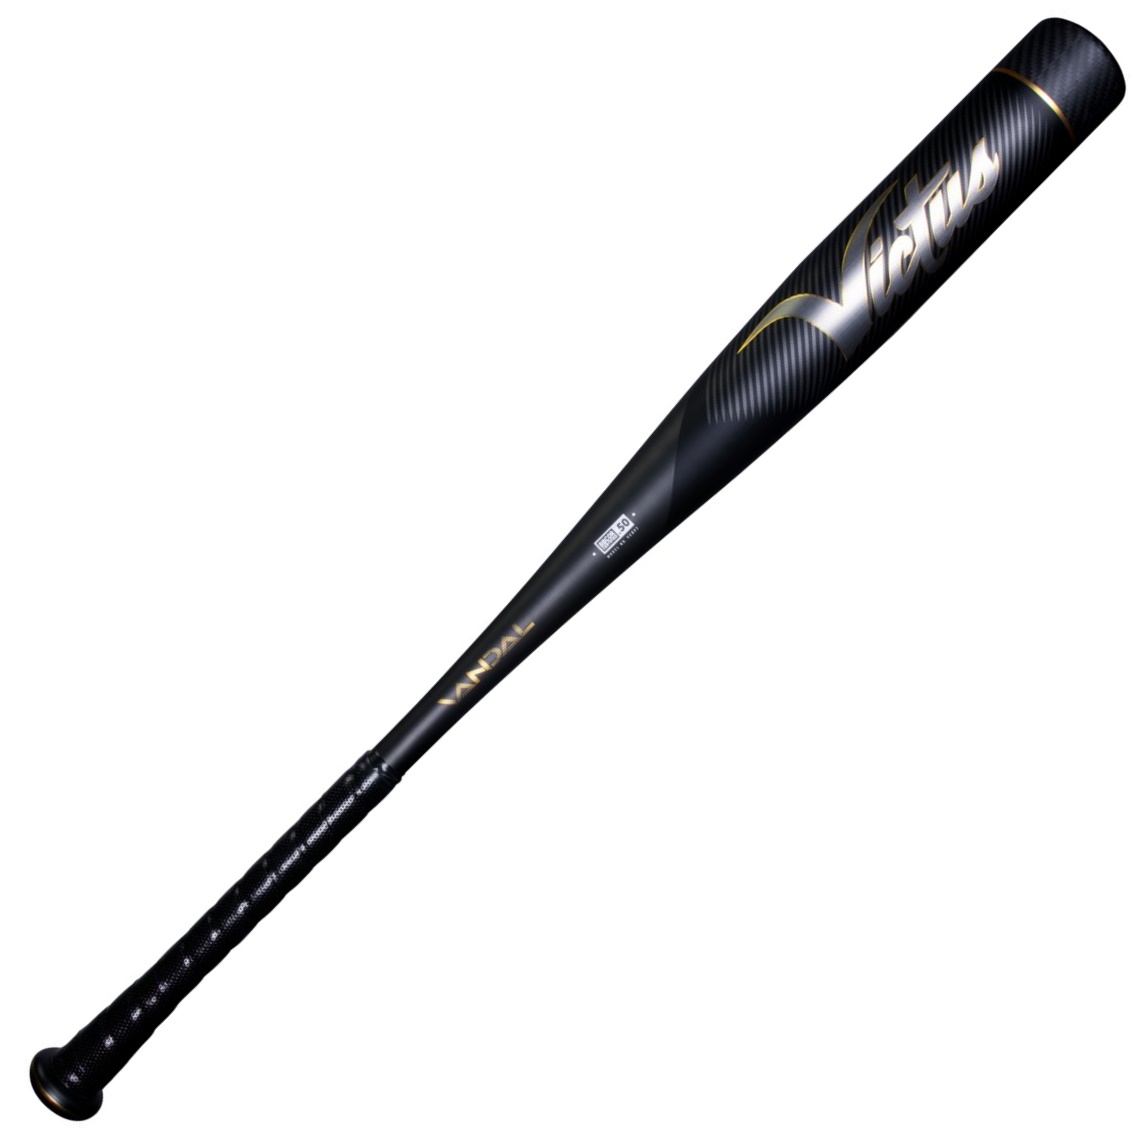  Ringless barrel design made of multi-variable wall thickness for a more flexible sweet spot Carbon composite barrel end creates an ultra-light swing weight for maximum bat speed One-piece hybrid design engineered and built with the highest grade alloy available Micro-perforated touch grip for superior feel and control 